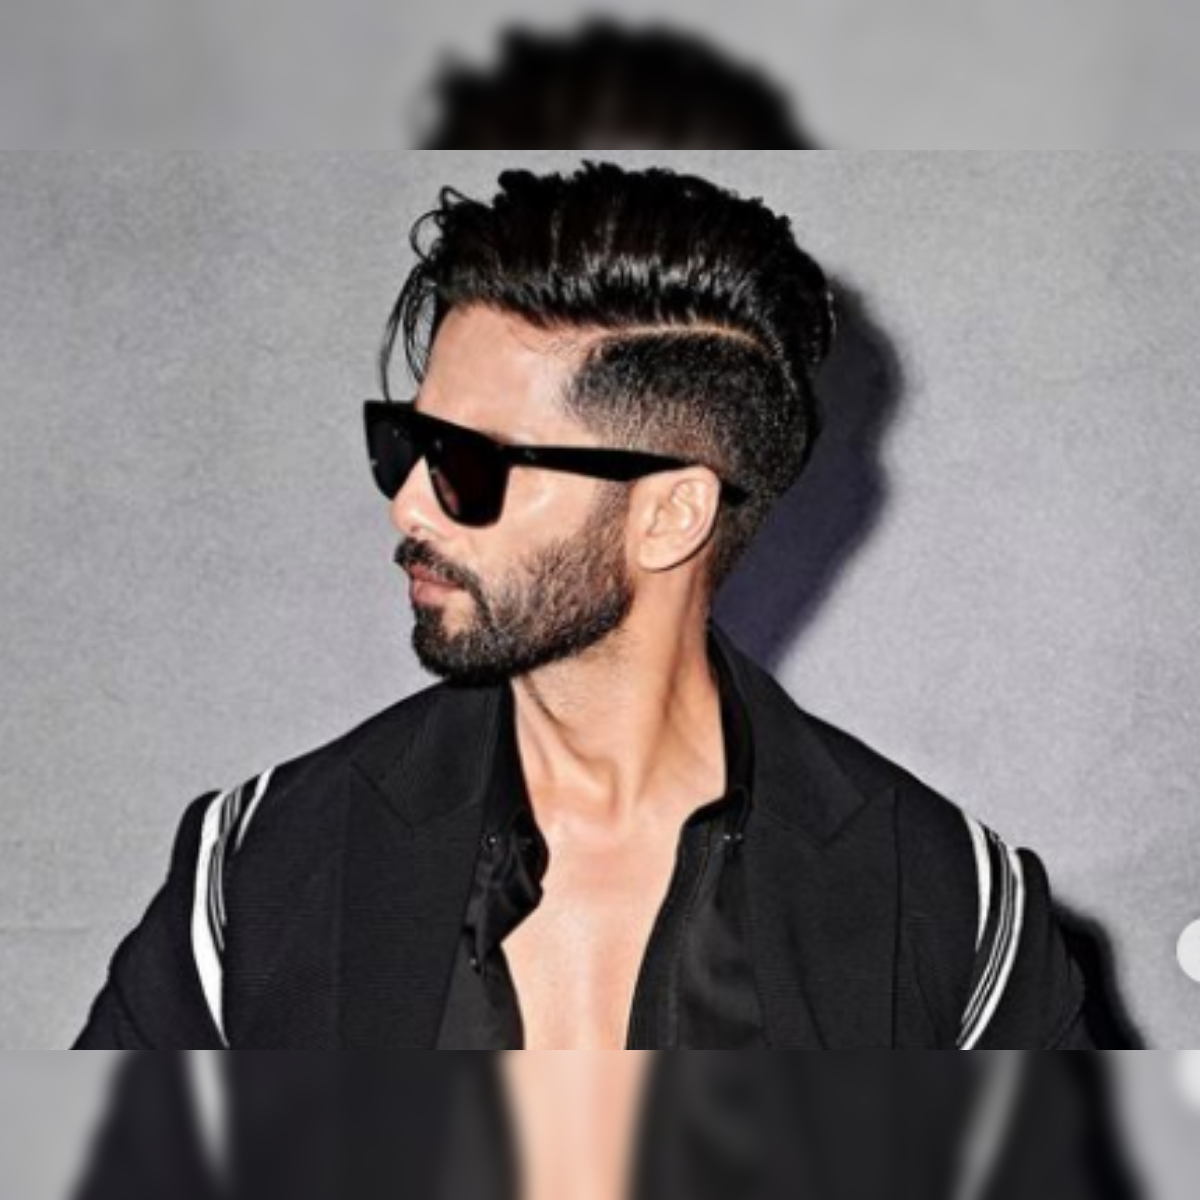 Shahid Kapoor News: From a backup dancer to a rock star: On Shahid Kapoor's  41st b'day, 5 songs that prove the actor is the god of Bollywood moves -  The Economic Times